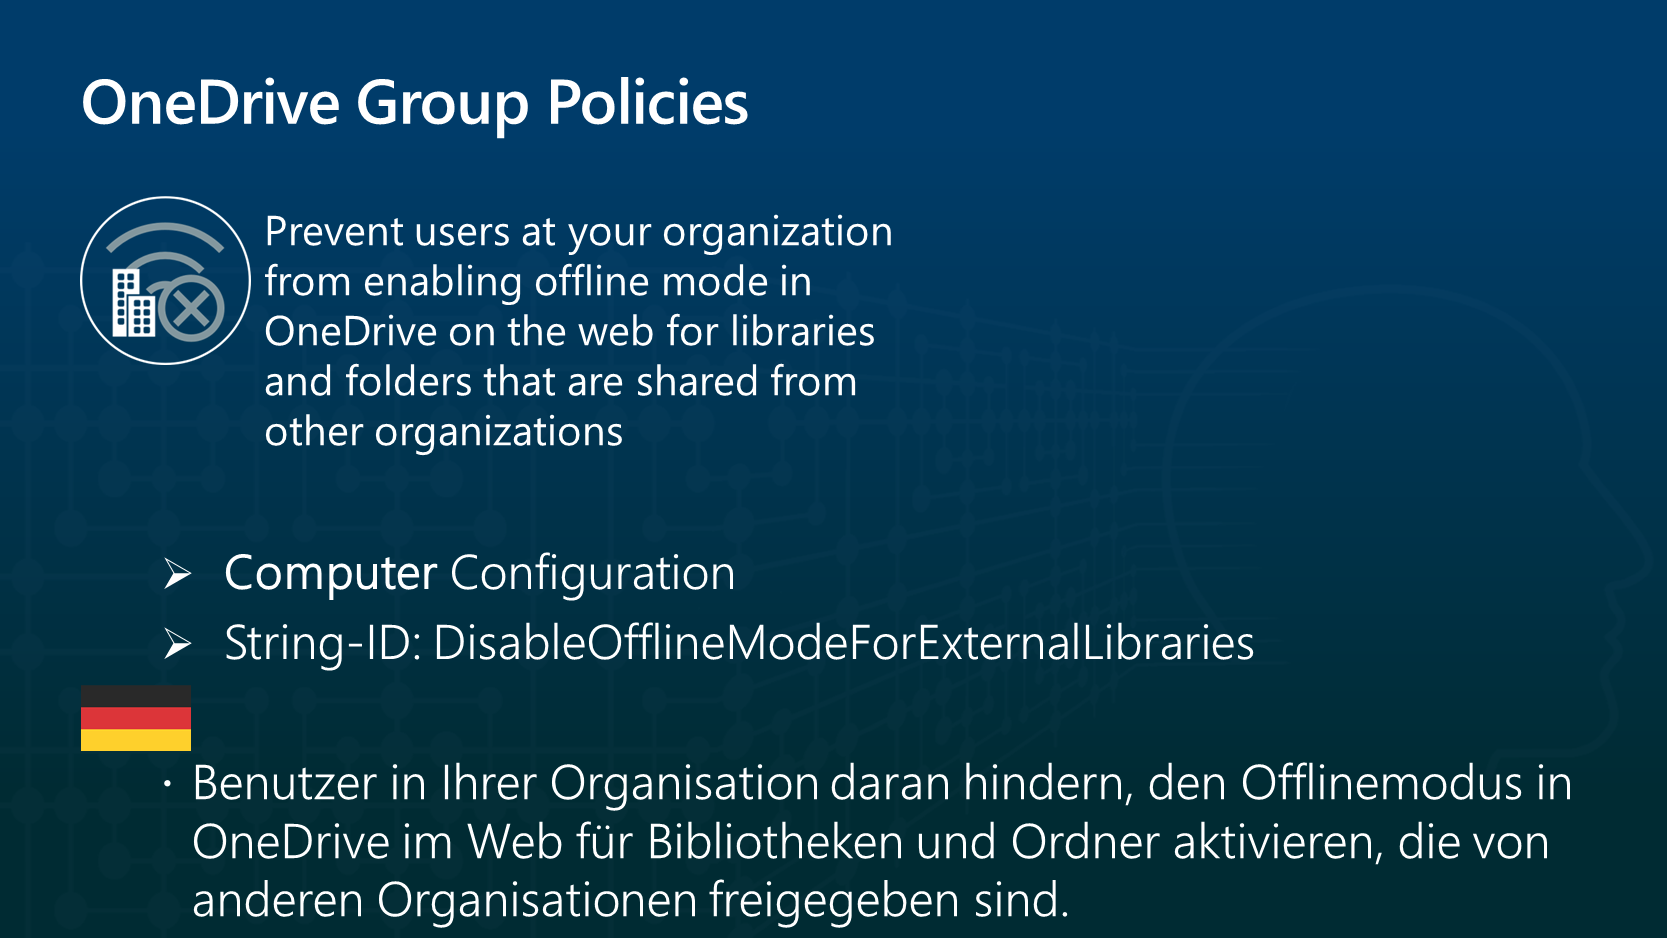 This screenshot shows the second group policy for OneDrive offline mode. With the name “Prevent users at your organization from enabling offline mode in OneDrive on the web for libraries and folders that are shared from other organizations” and the string ID DisableOfflineModeForExternalLibraries.